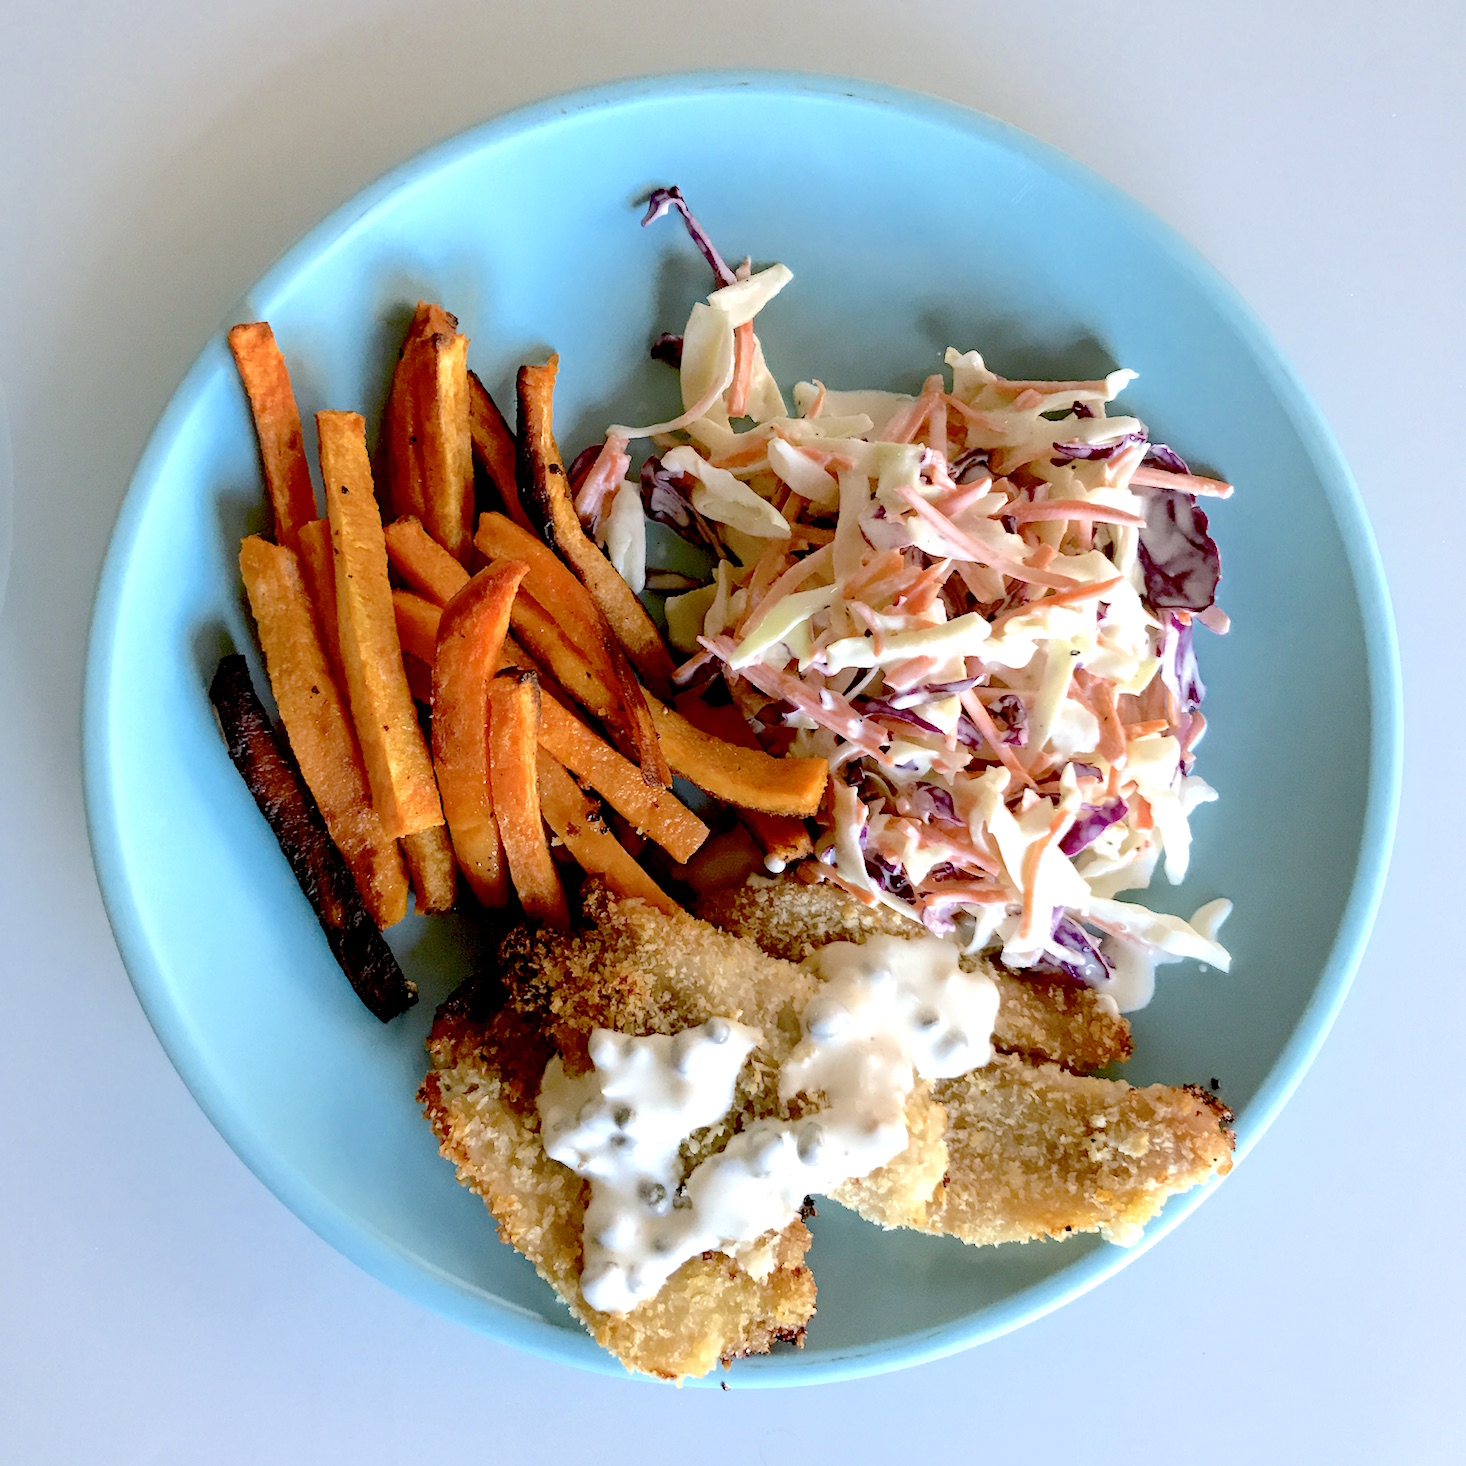 Terra's Kitchen March 2018 - fish and chips